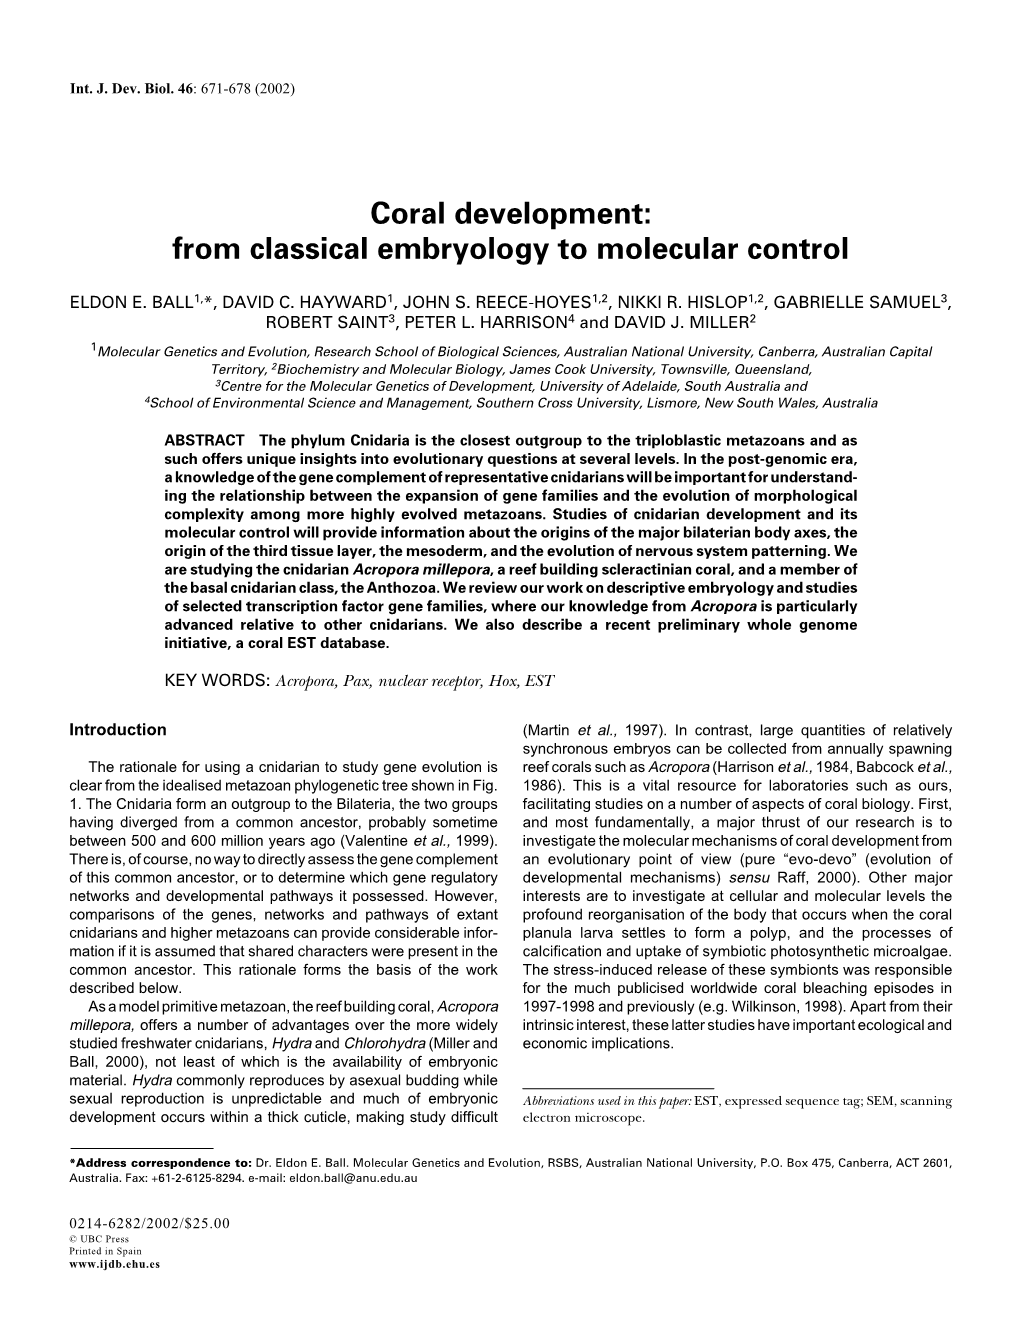 Coral Development: from Classical Embryology to Molecular Control